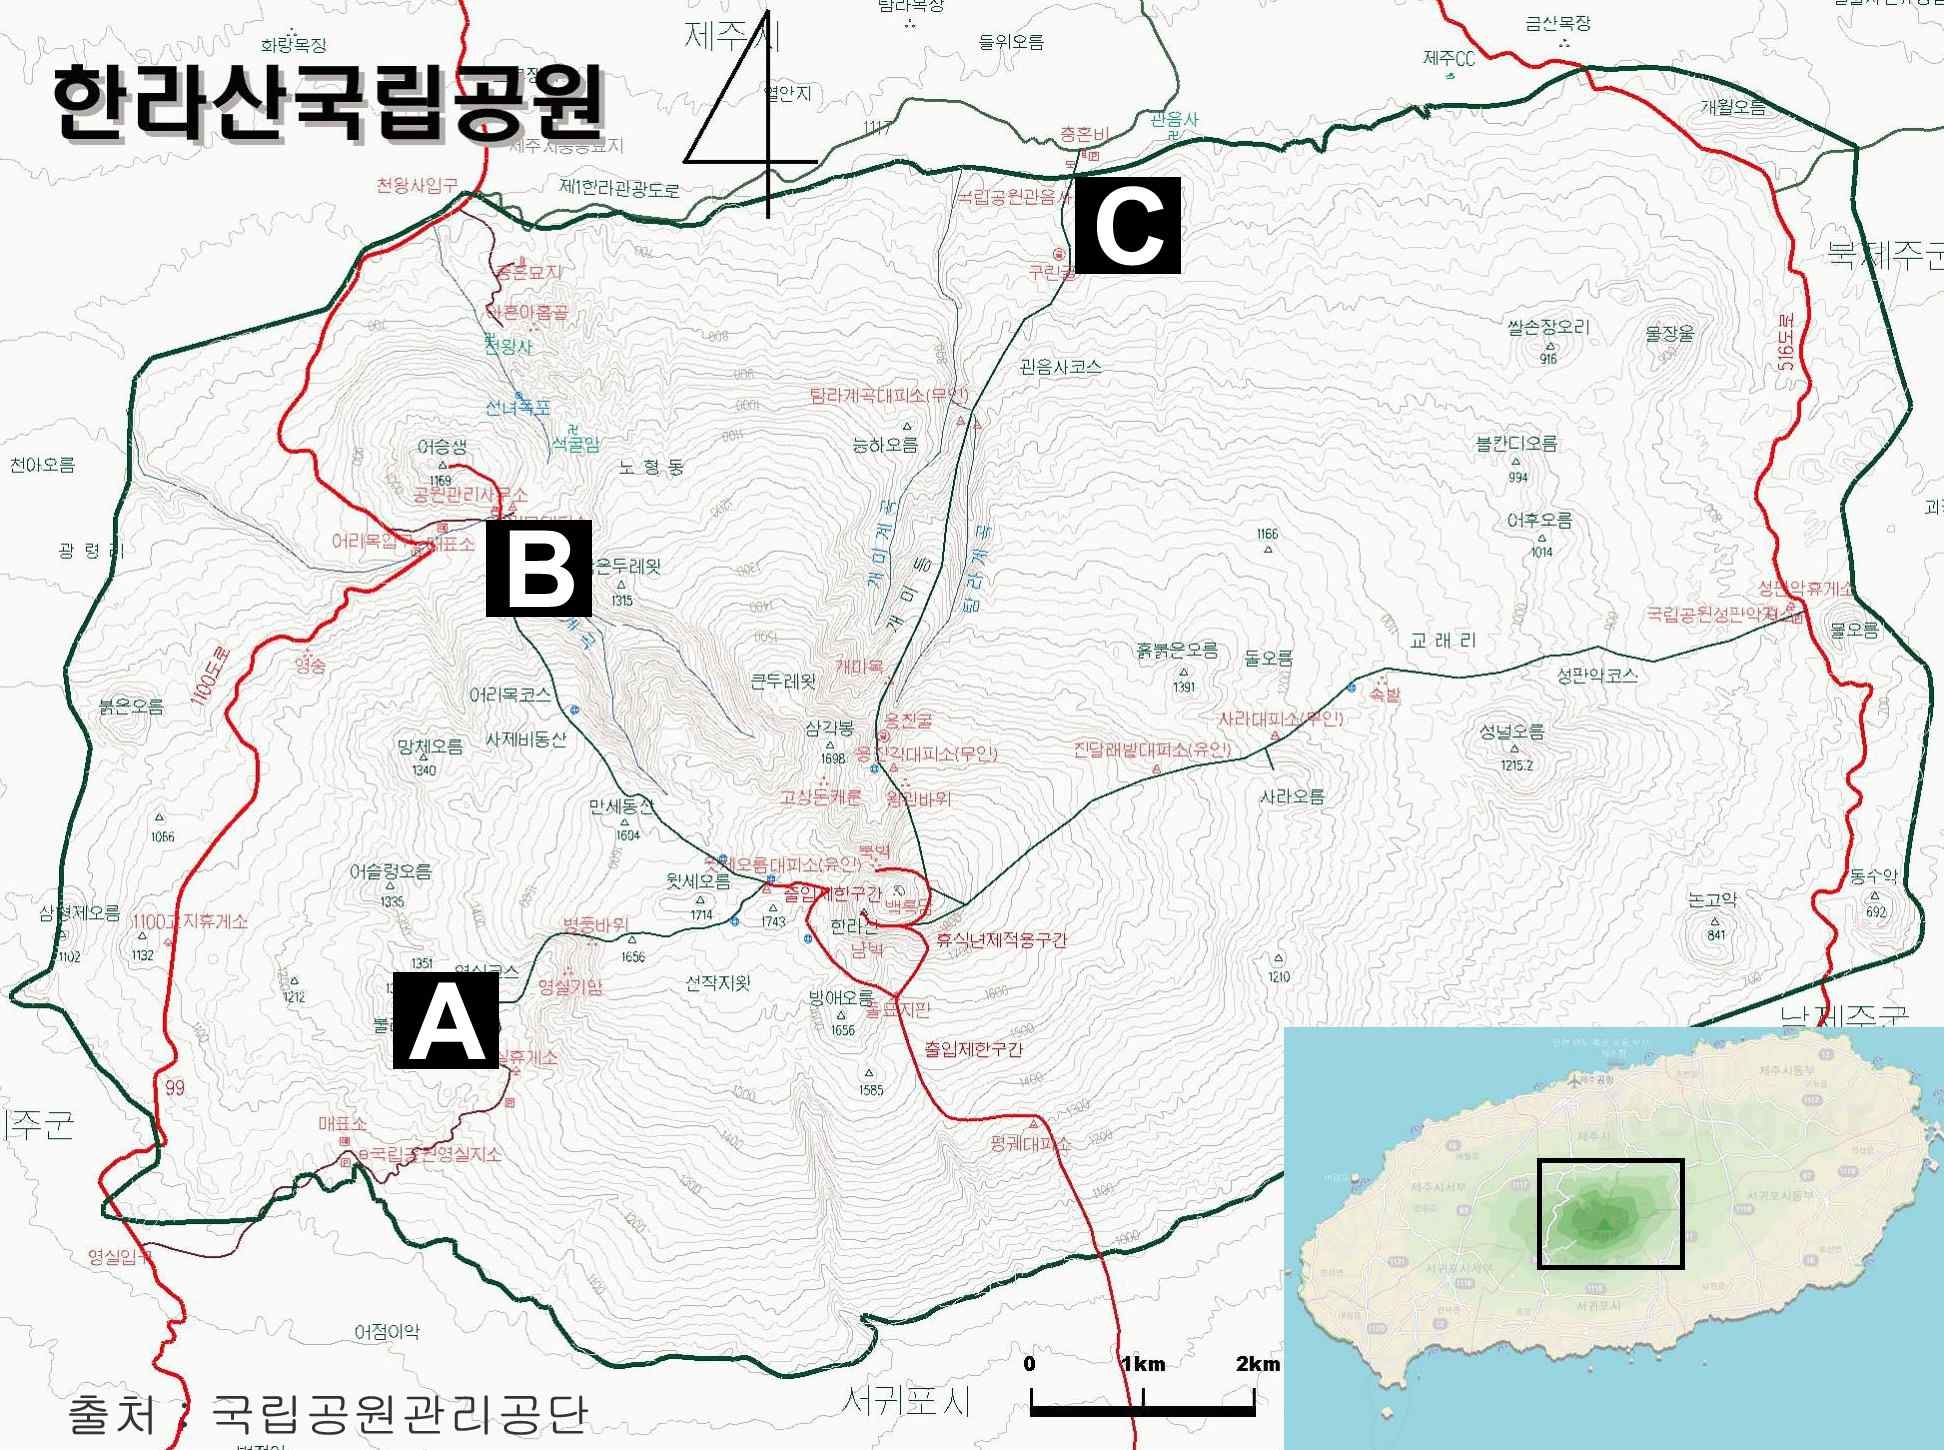 Fig. 1. The location of study site at Mt. Halla(A: Yeongsil, B: Eorimok, C: